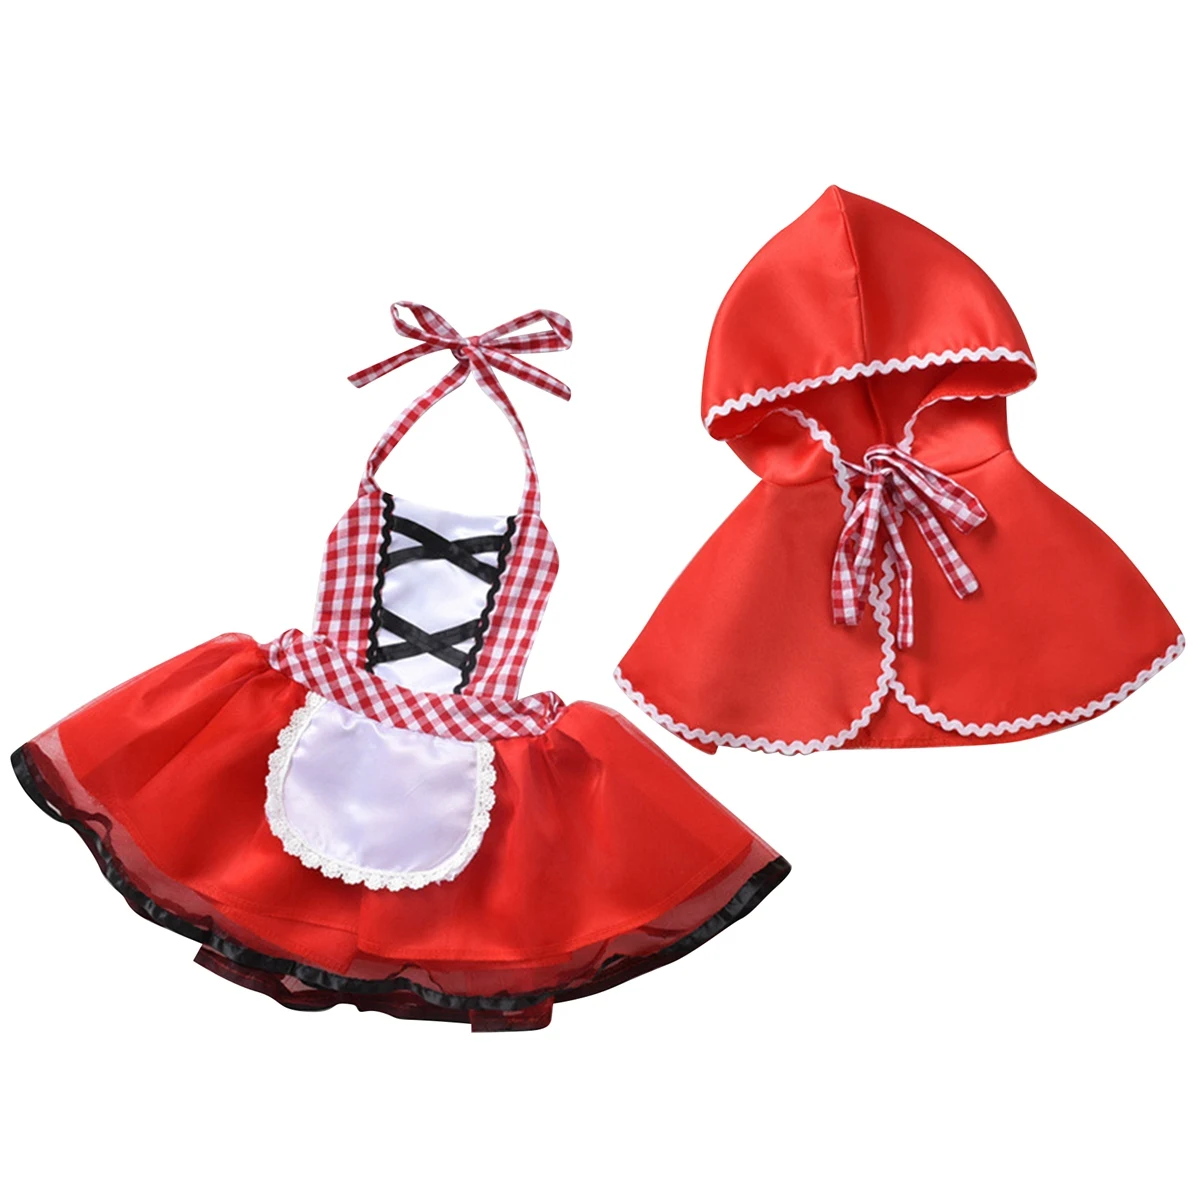 

Newborn Toddler Baby Girls Halter Romper Dress Red Cloak Little Red Hood Outfits Party Cosplay Costume,80